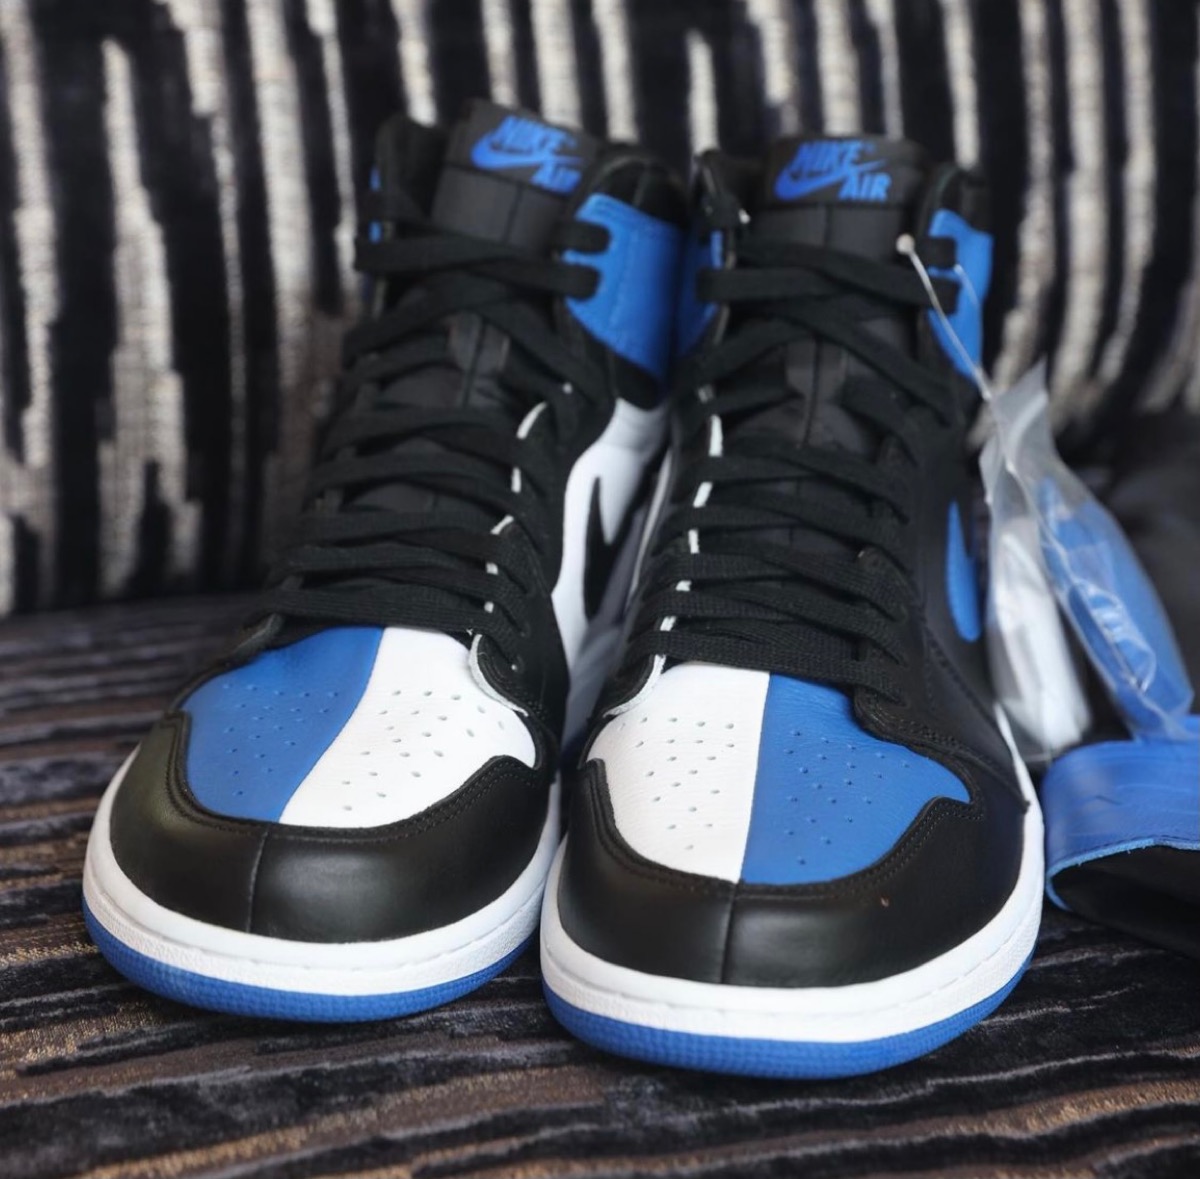 Defective Expressly About setting DJ Khaledが Nike Air Jordan 1 Retro High OG “Homage to Home”のRoyalバージョンを公開 |  UP TO DATE